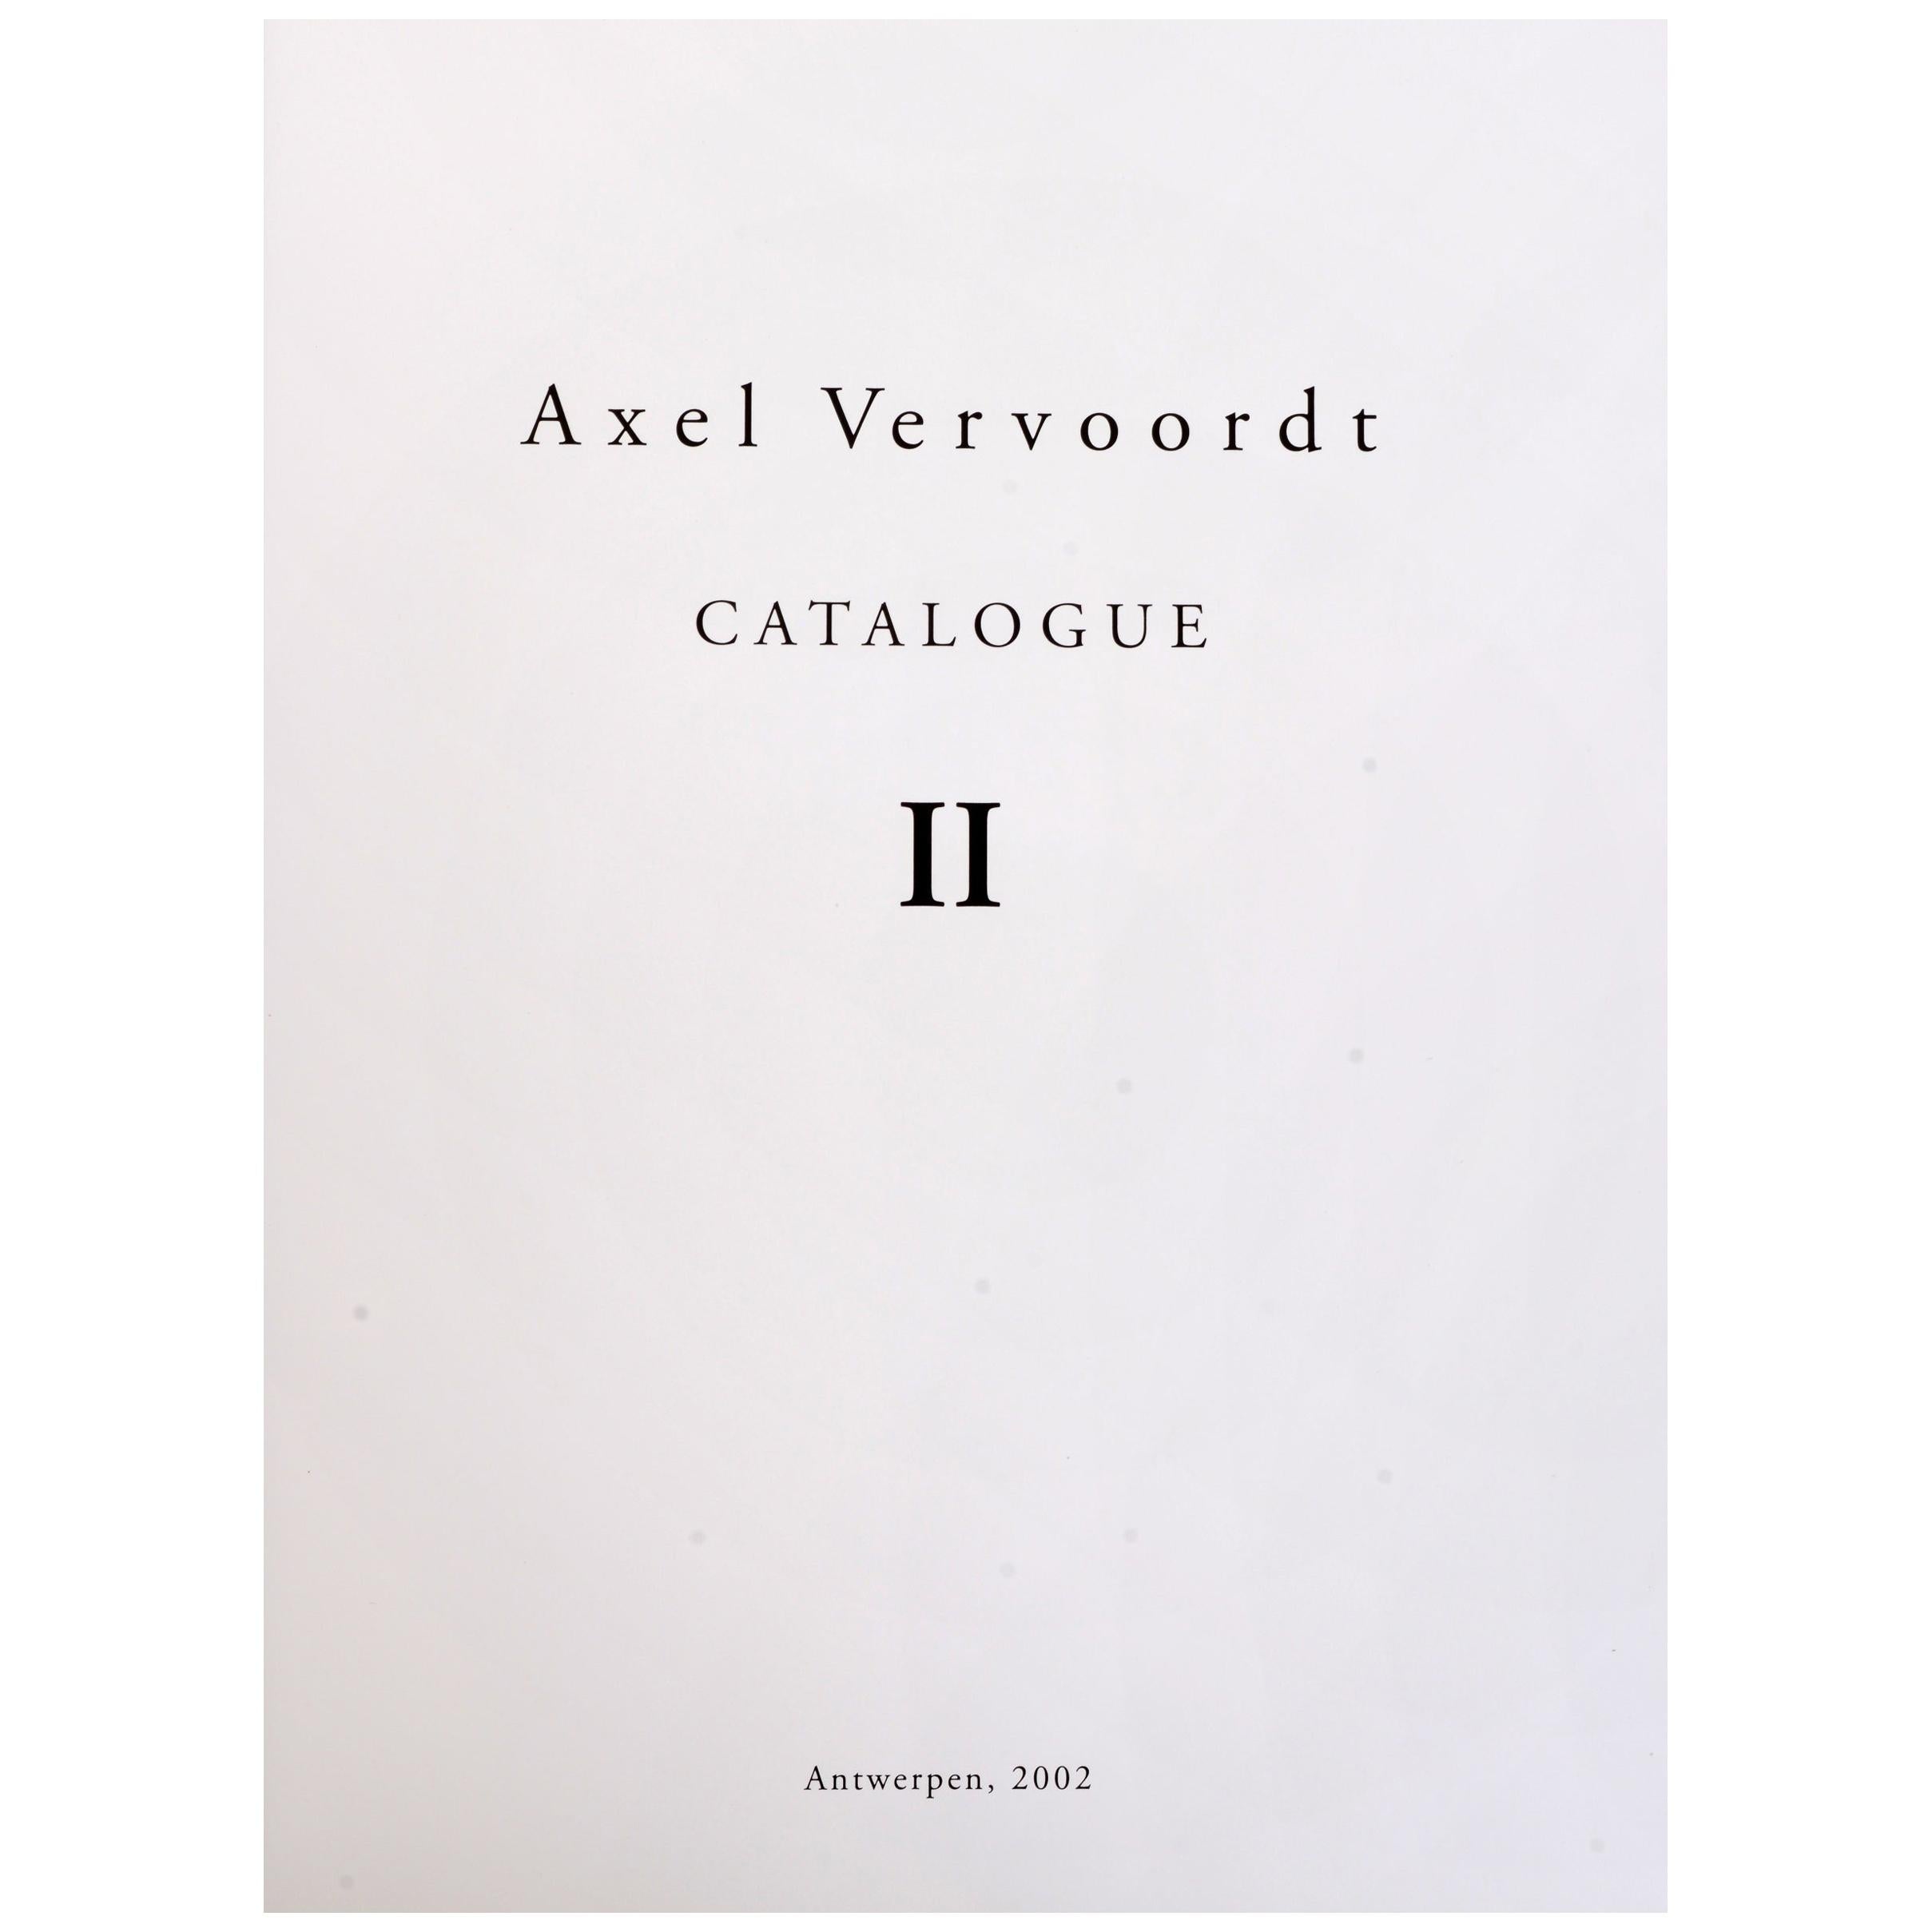 Axel Vervoordt, Catalogue II, First Edition